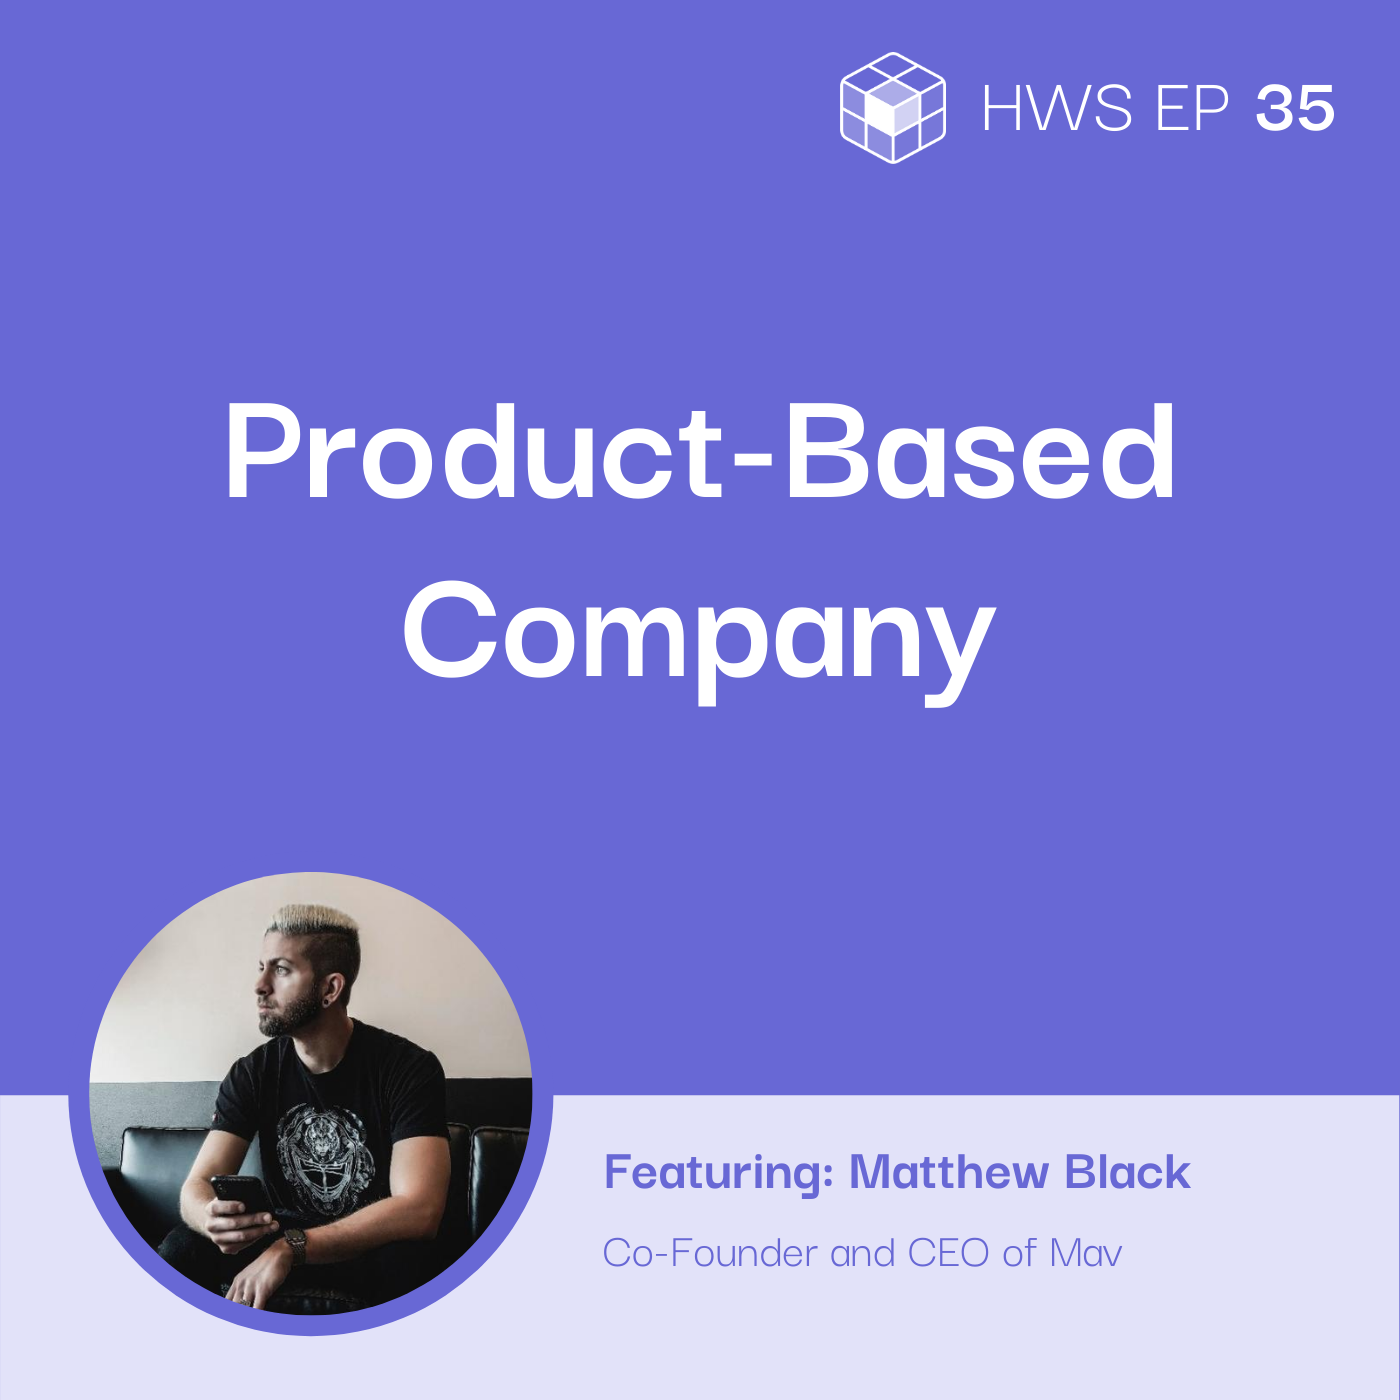 Matthew Black shares how to successfully transition from a service to product-based company